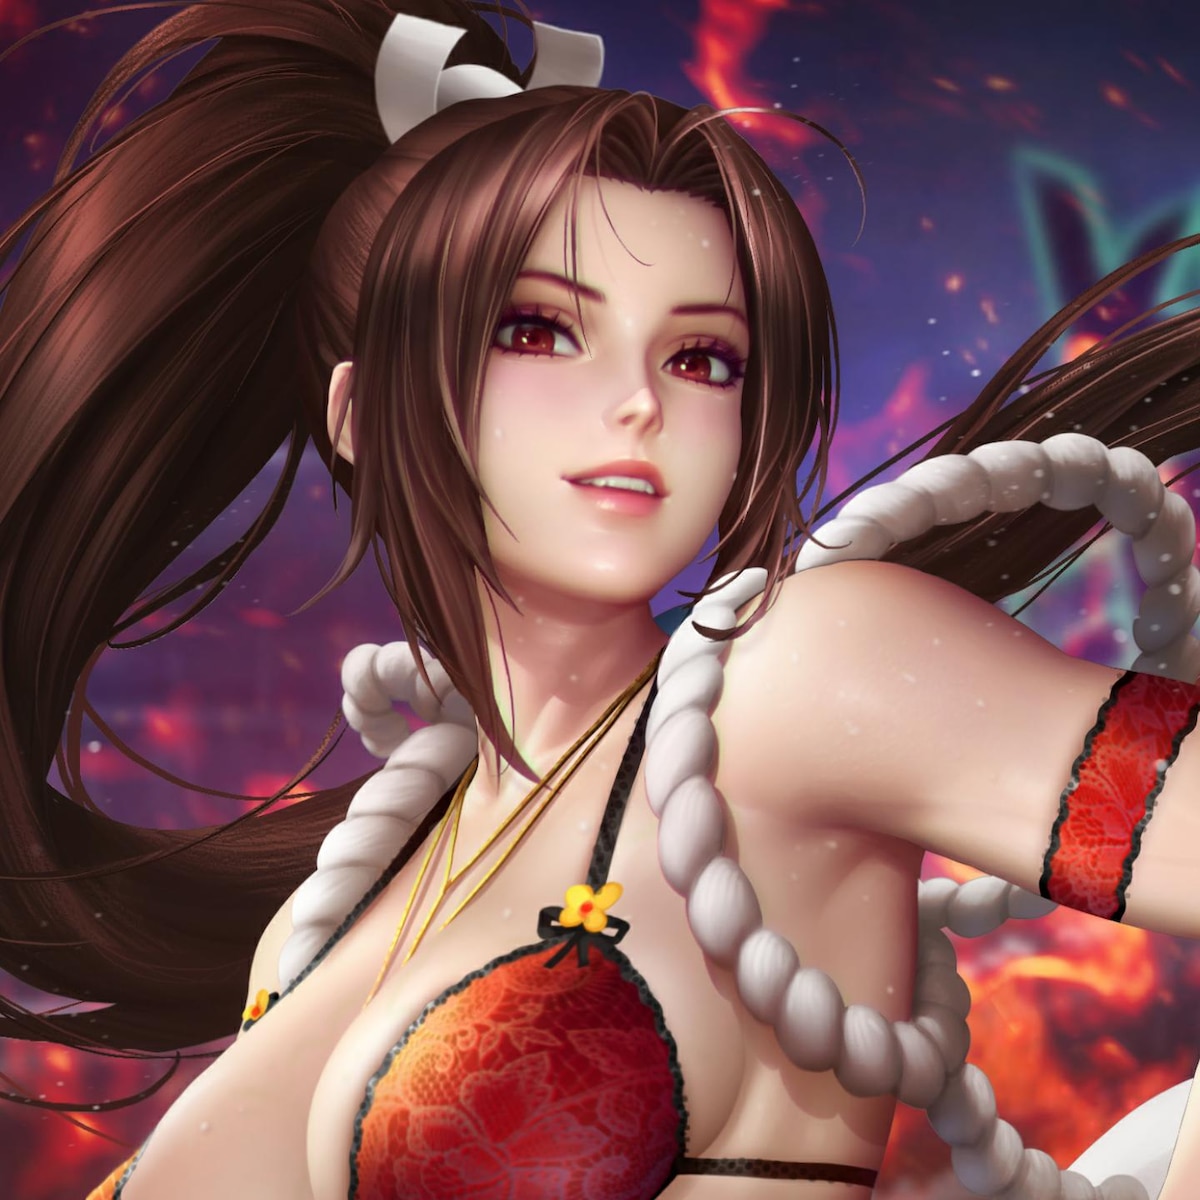 Mai Shiranui / 18+ X-ray / The King of Fighters / NSFW & SFW